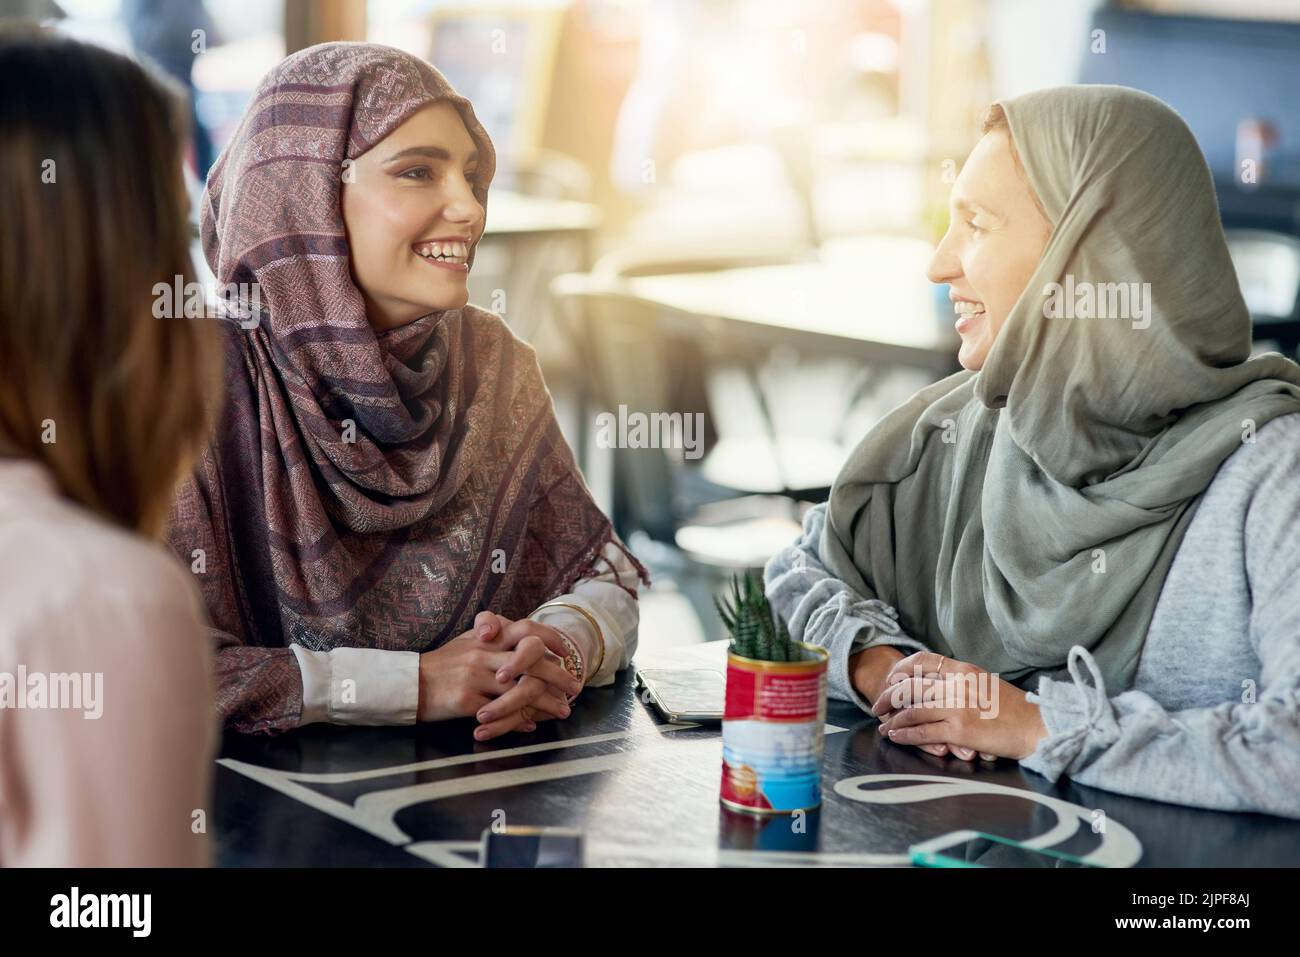 Having great friends makes all the difference in the world. a group of women chatting in a cafe. Stock Photo